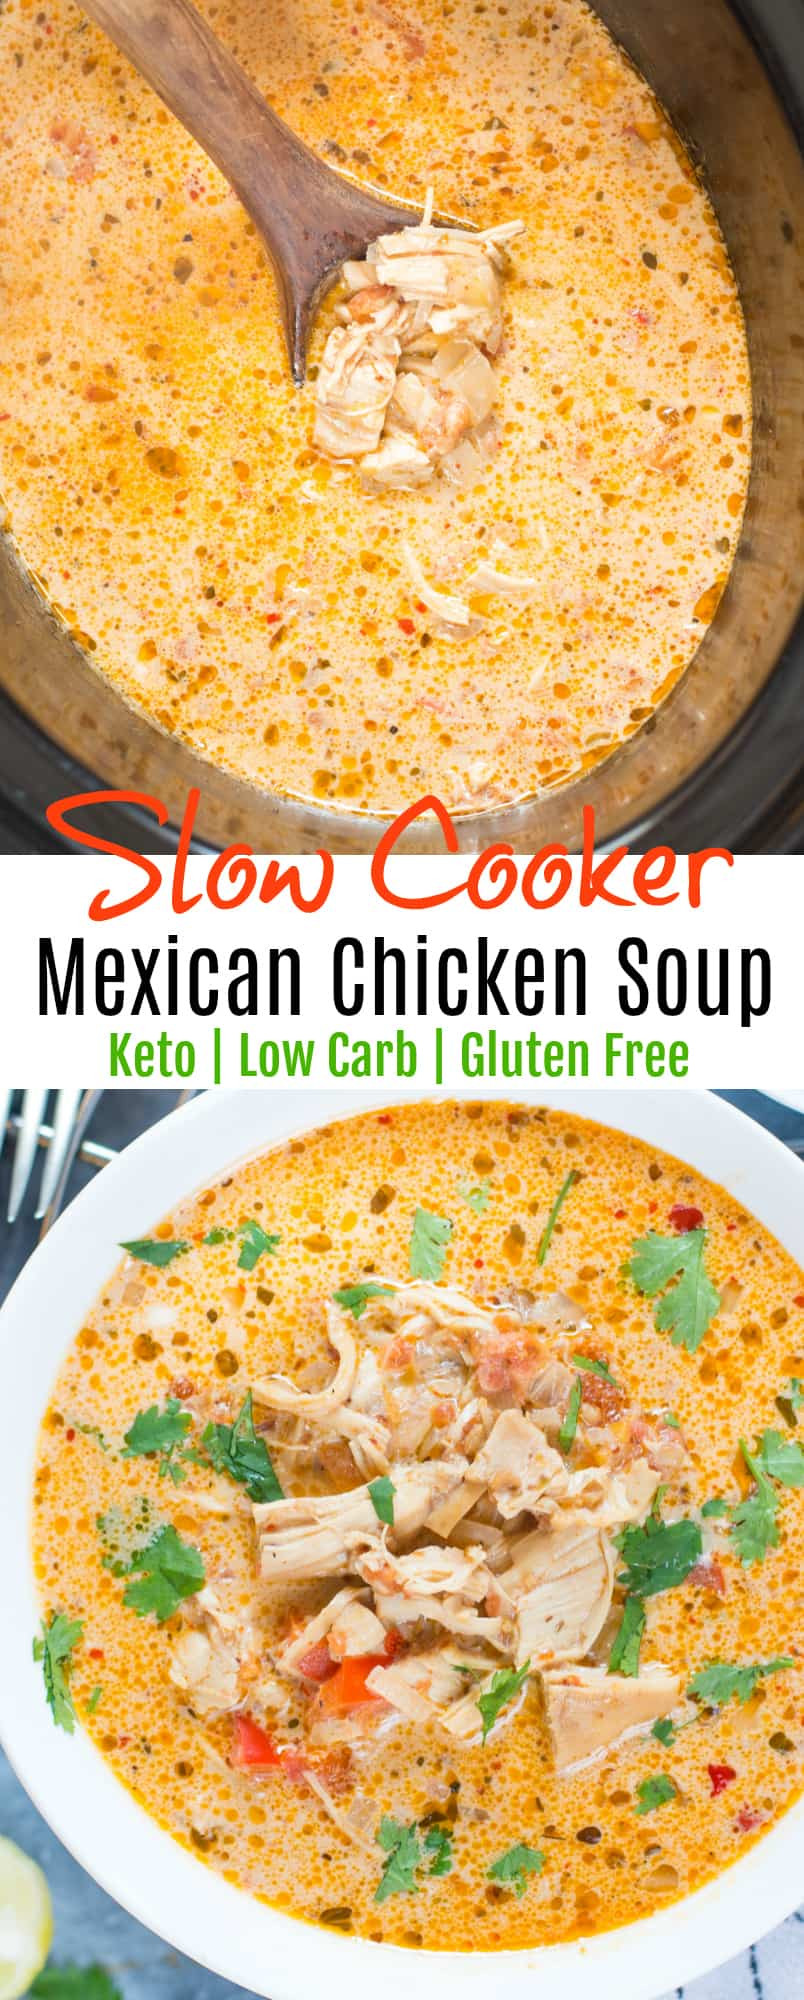 Keto Mexican Chicken Soup
 SLOW COOKER MEXICAN CHICKEN SOUP The flavours of kitchen